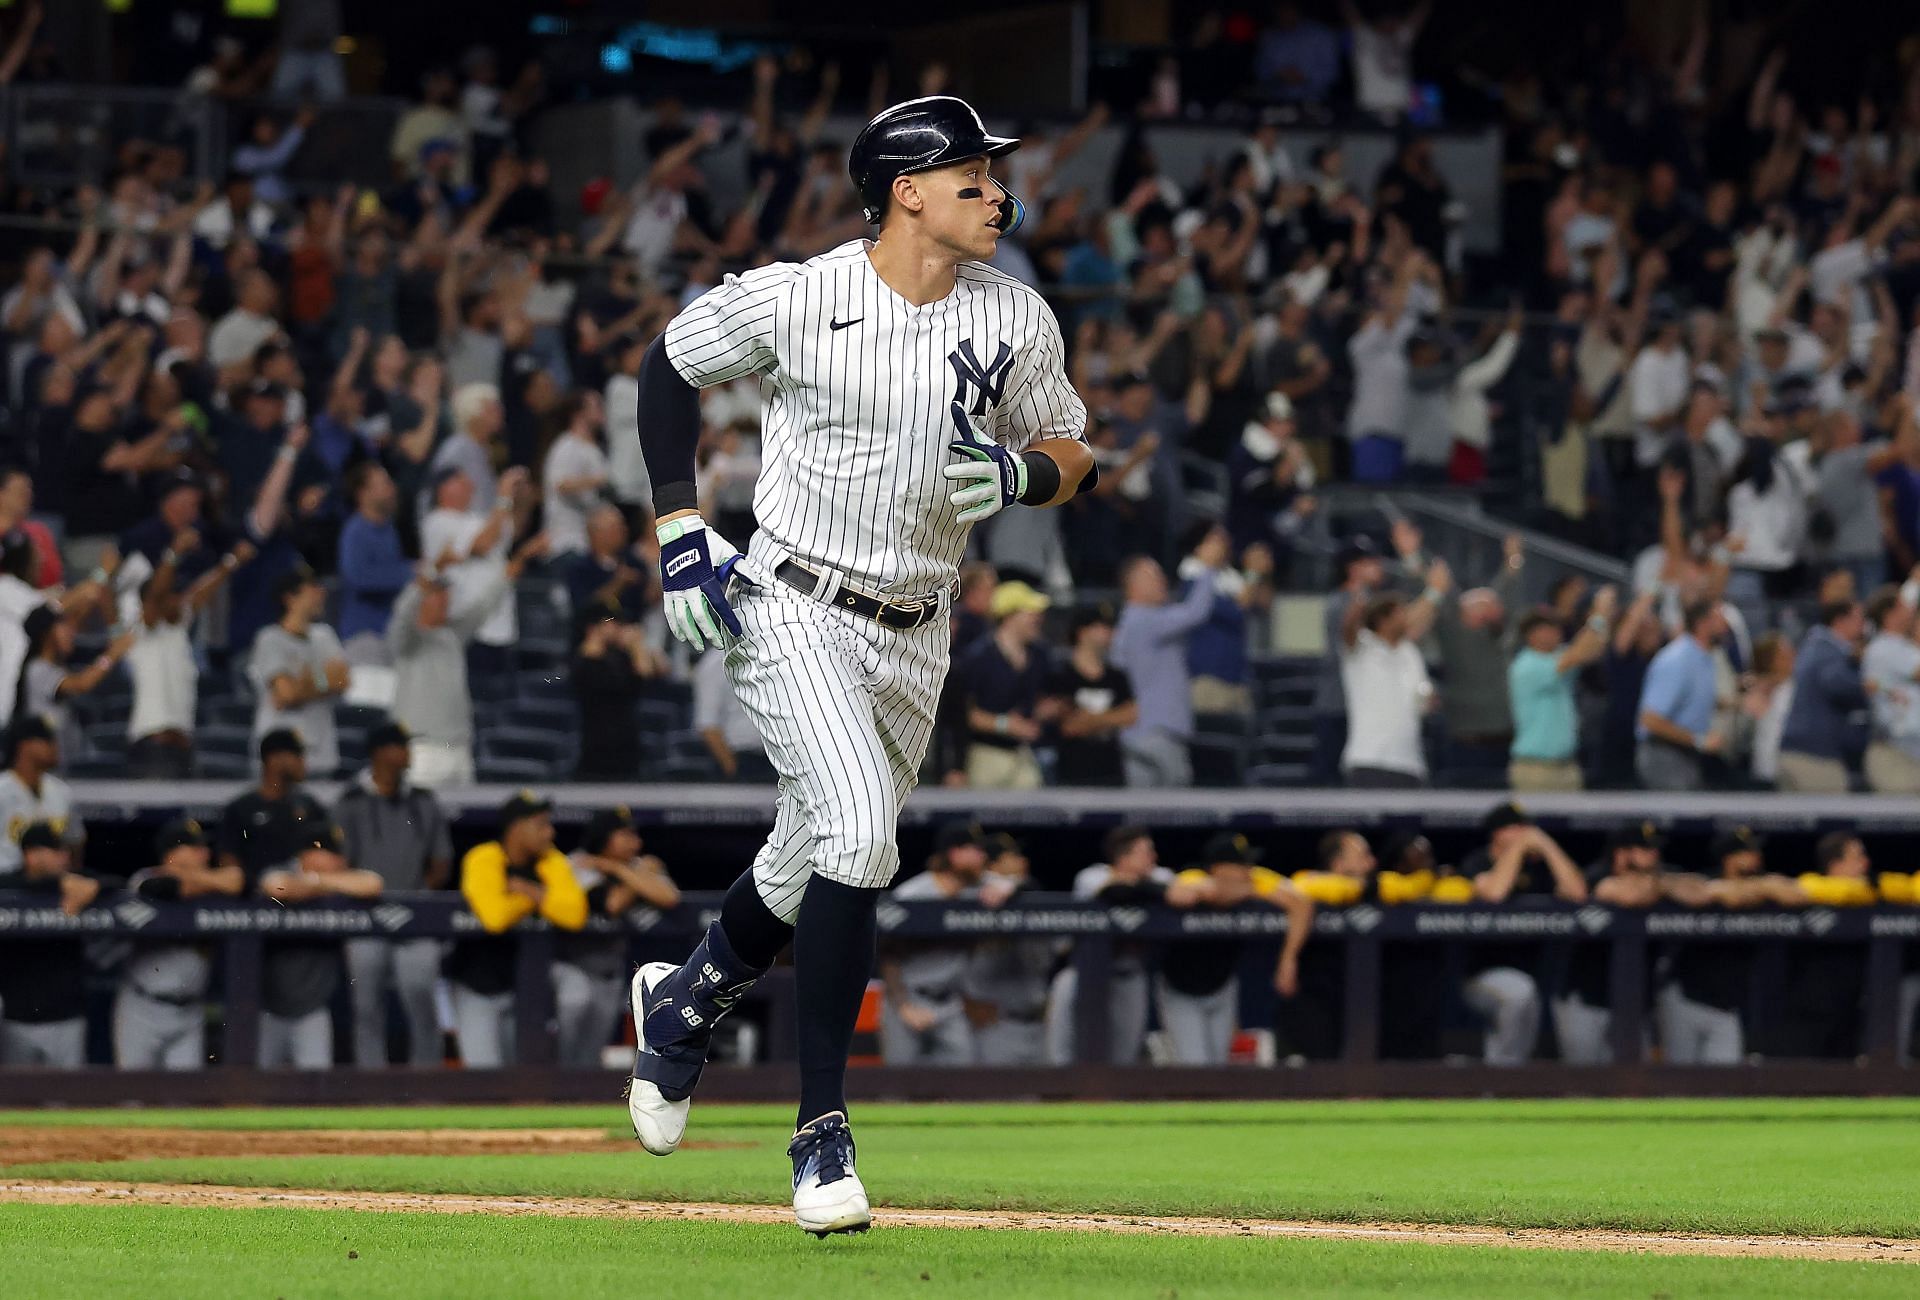 Aaron Judge hits 60th homer, 1 away from Roger Maris' American